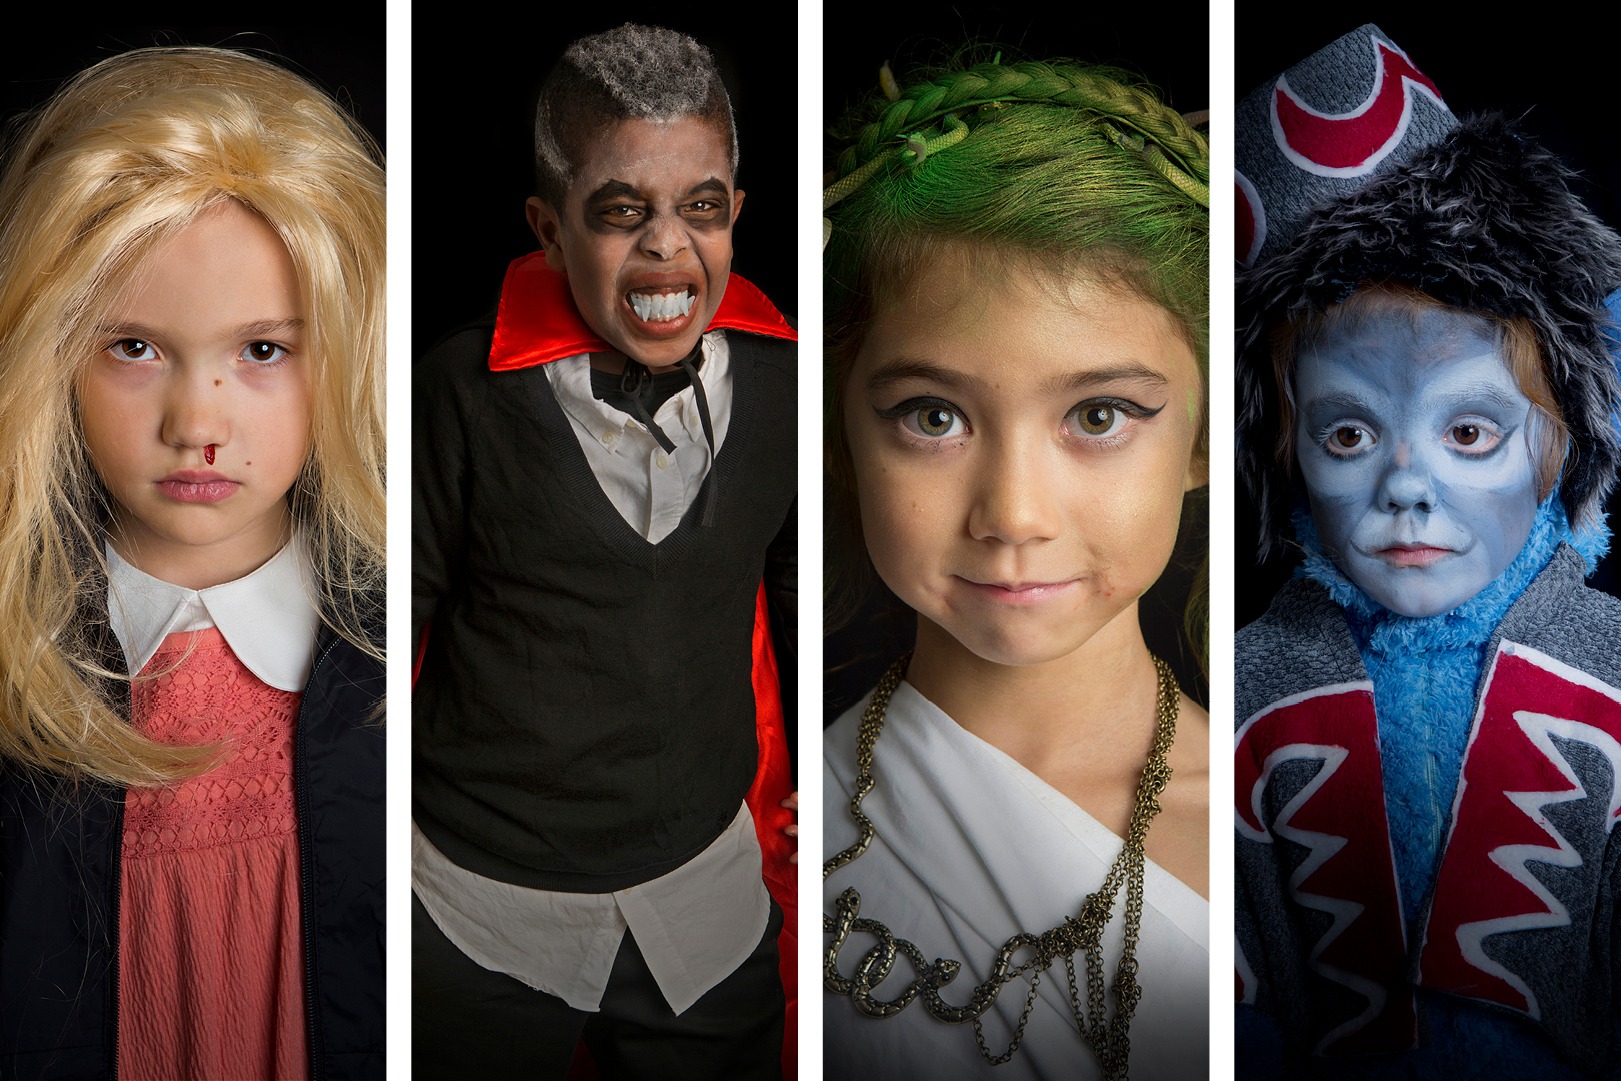 Collage of four portraits of young children in Halloween costumes